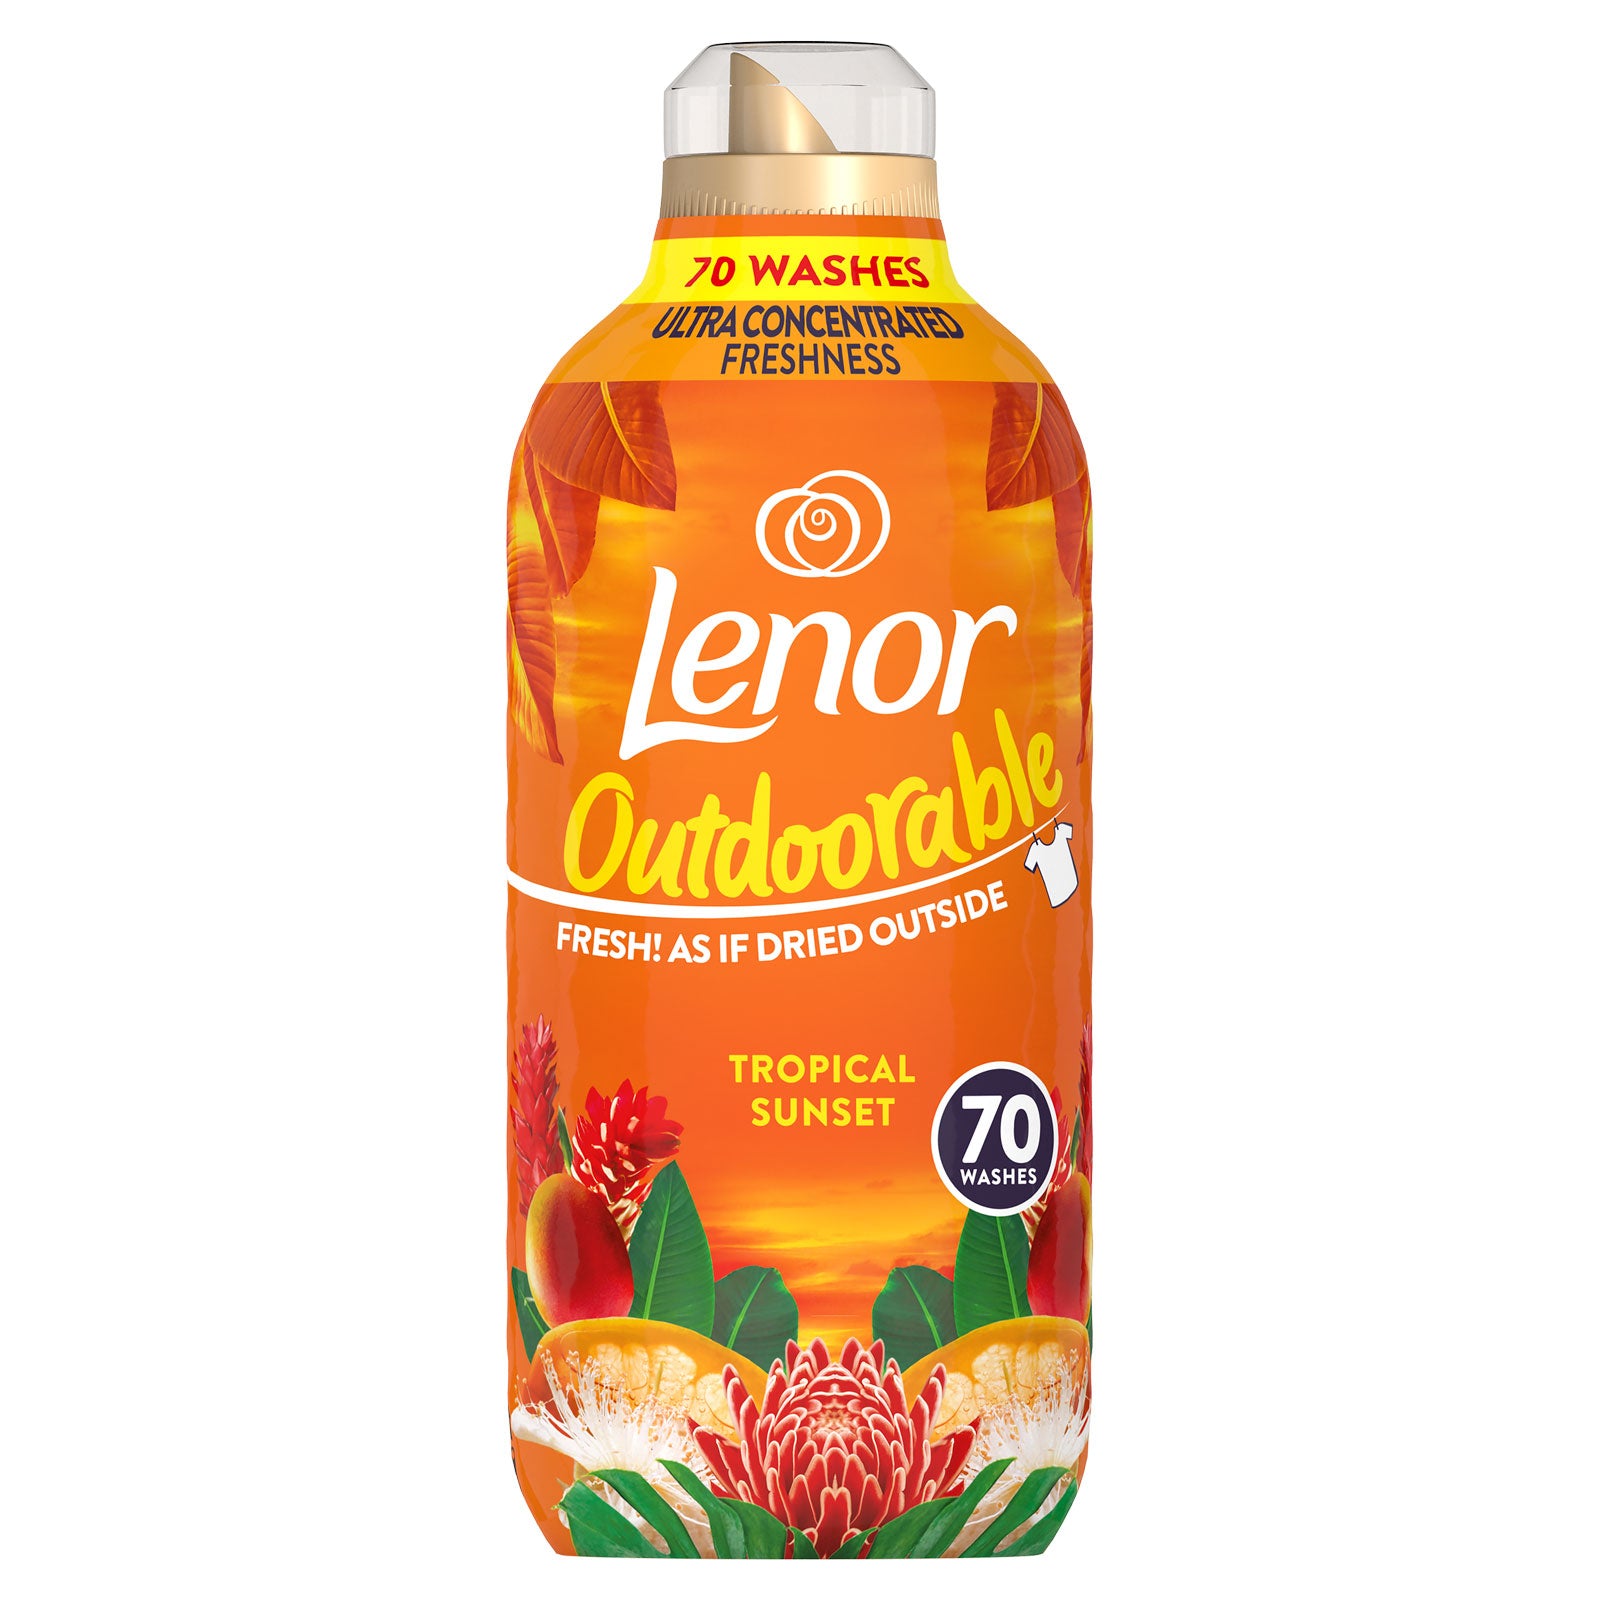 Lenor Outdoorable Tropical Sunset 980ml (70 Washes)